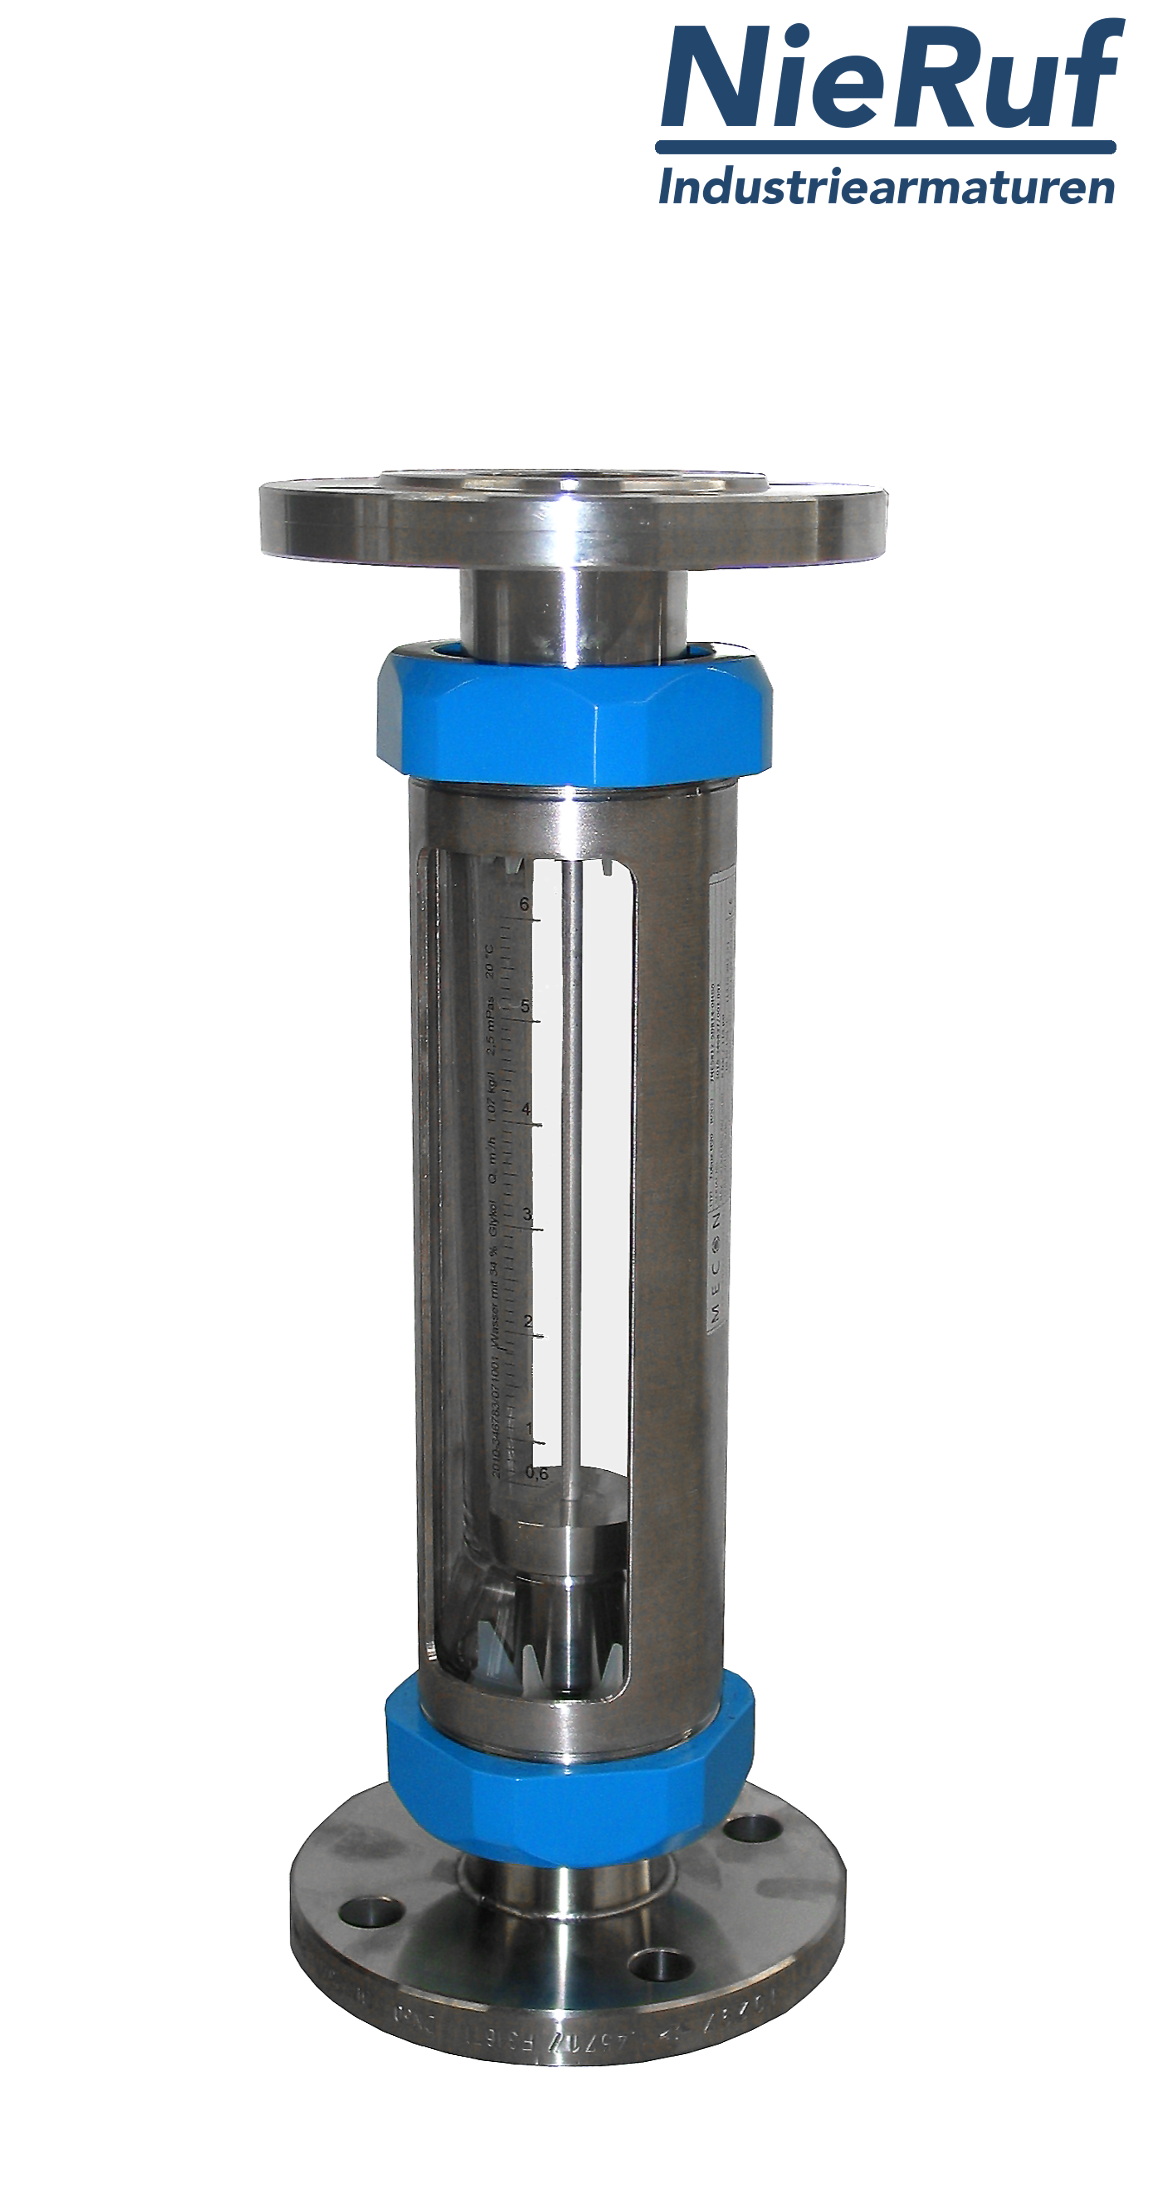 Variable area flowmeter stainless steel + borosilicate flange DN25 300.0 - 3000 l/h water FKM